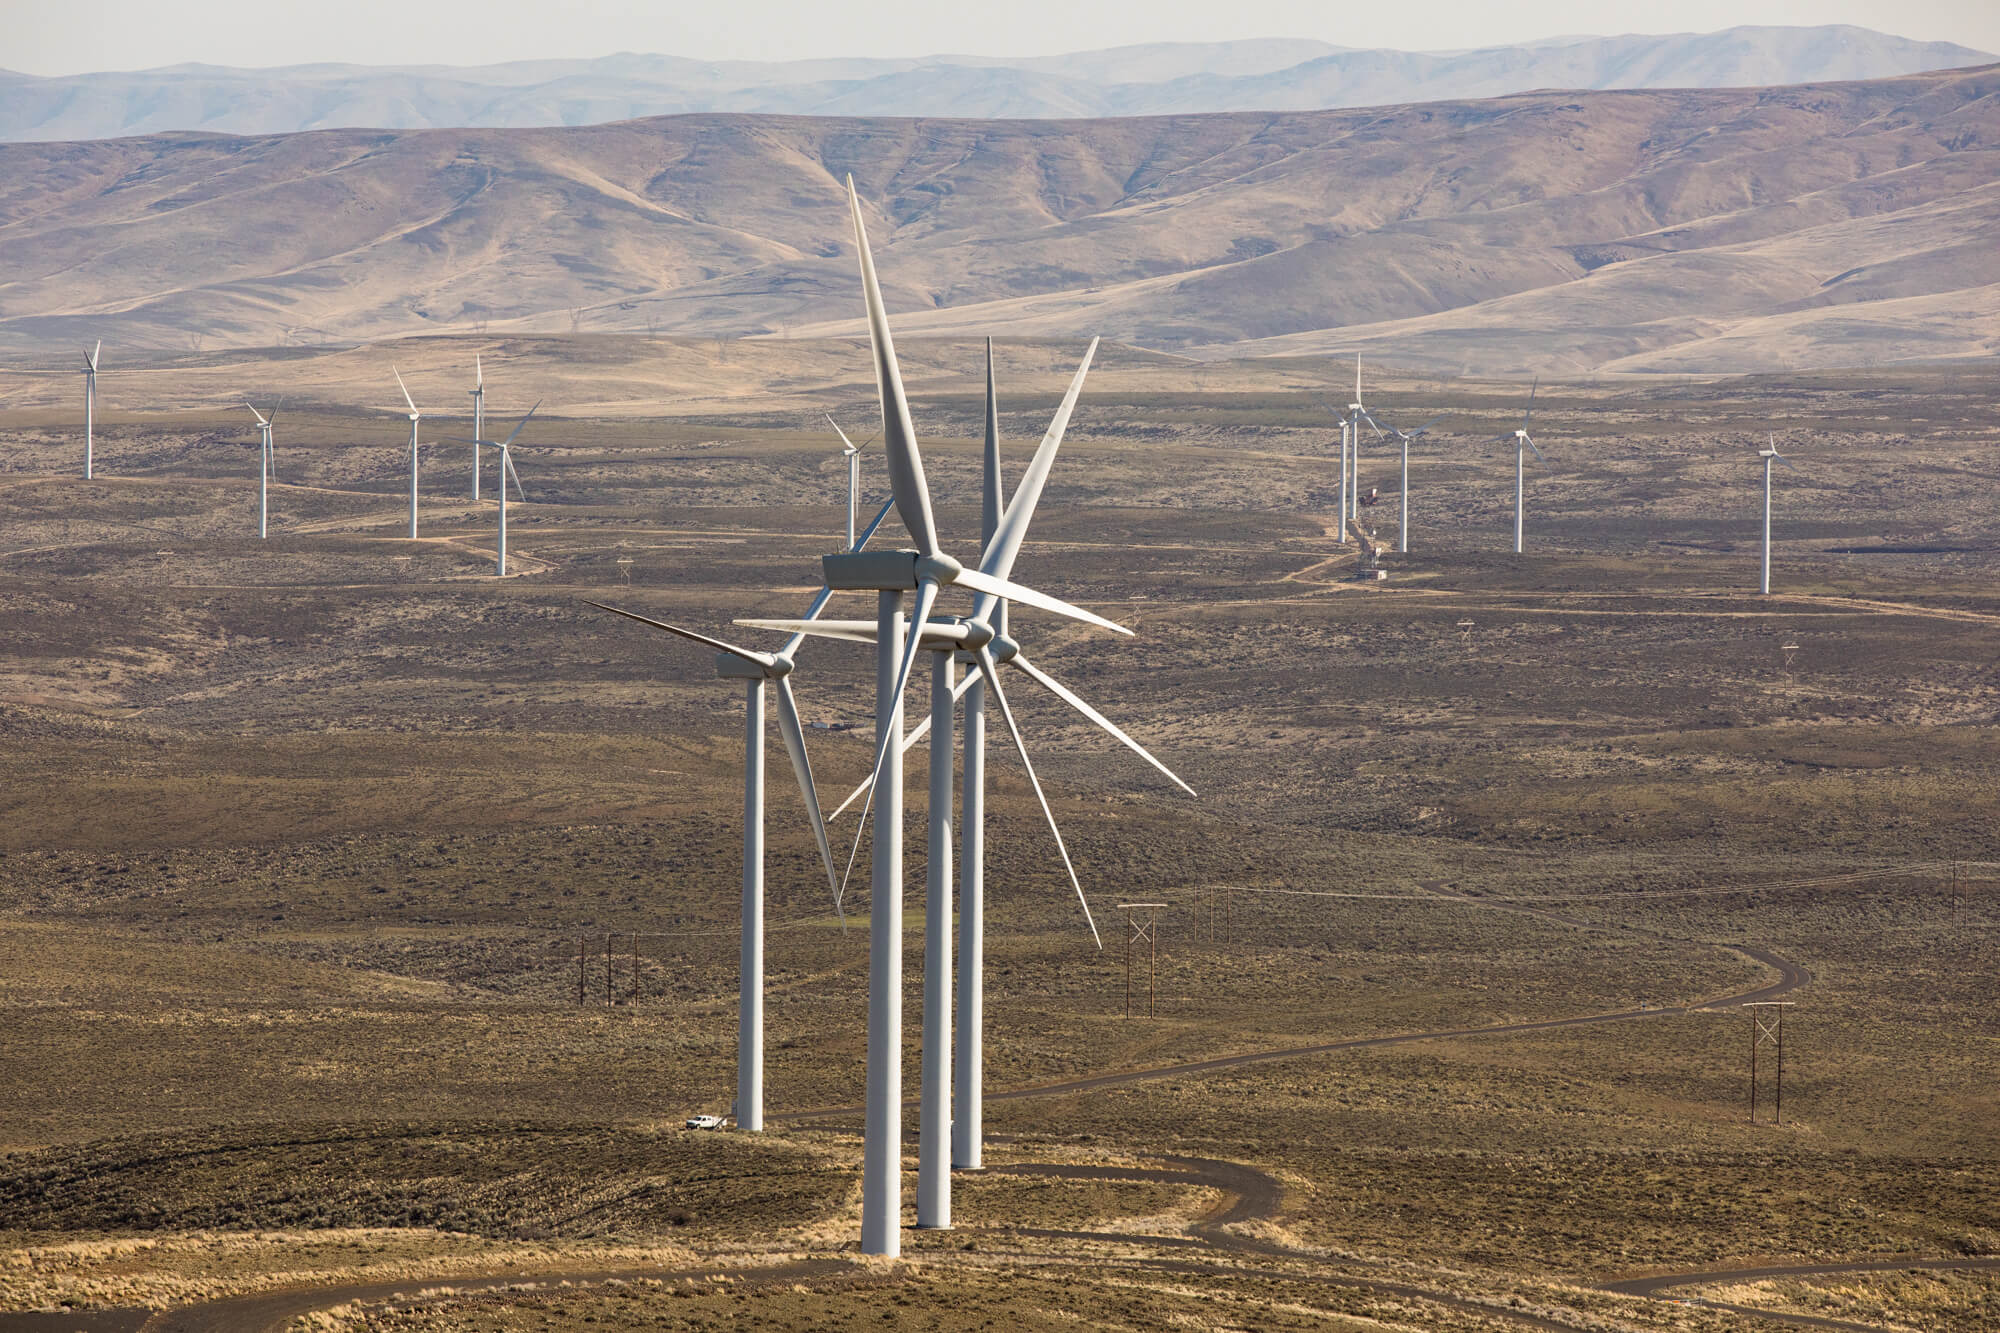 The Wild Horse wind and solar farm east of Ellensburg, Washington on Whiskey Dick Mountain generates electricity for suburban Seattle utility Puget Sound Energy. The rotors on its 149 wind turbines are larger than the wingspan of a Boeing 747, capturing enough energy to power over 400 homes.